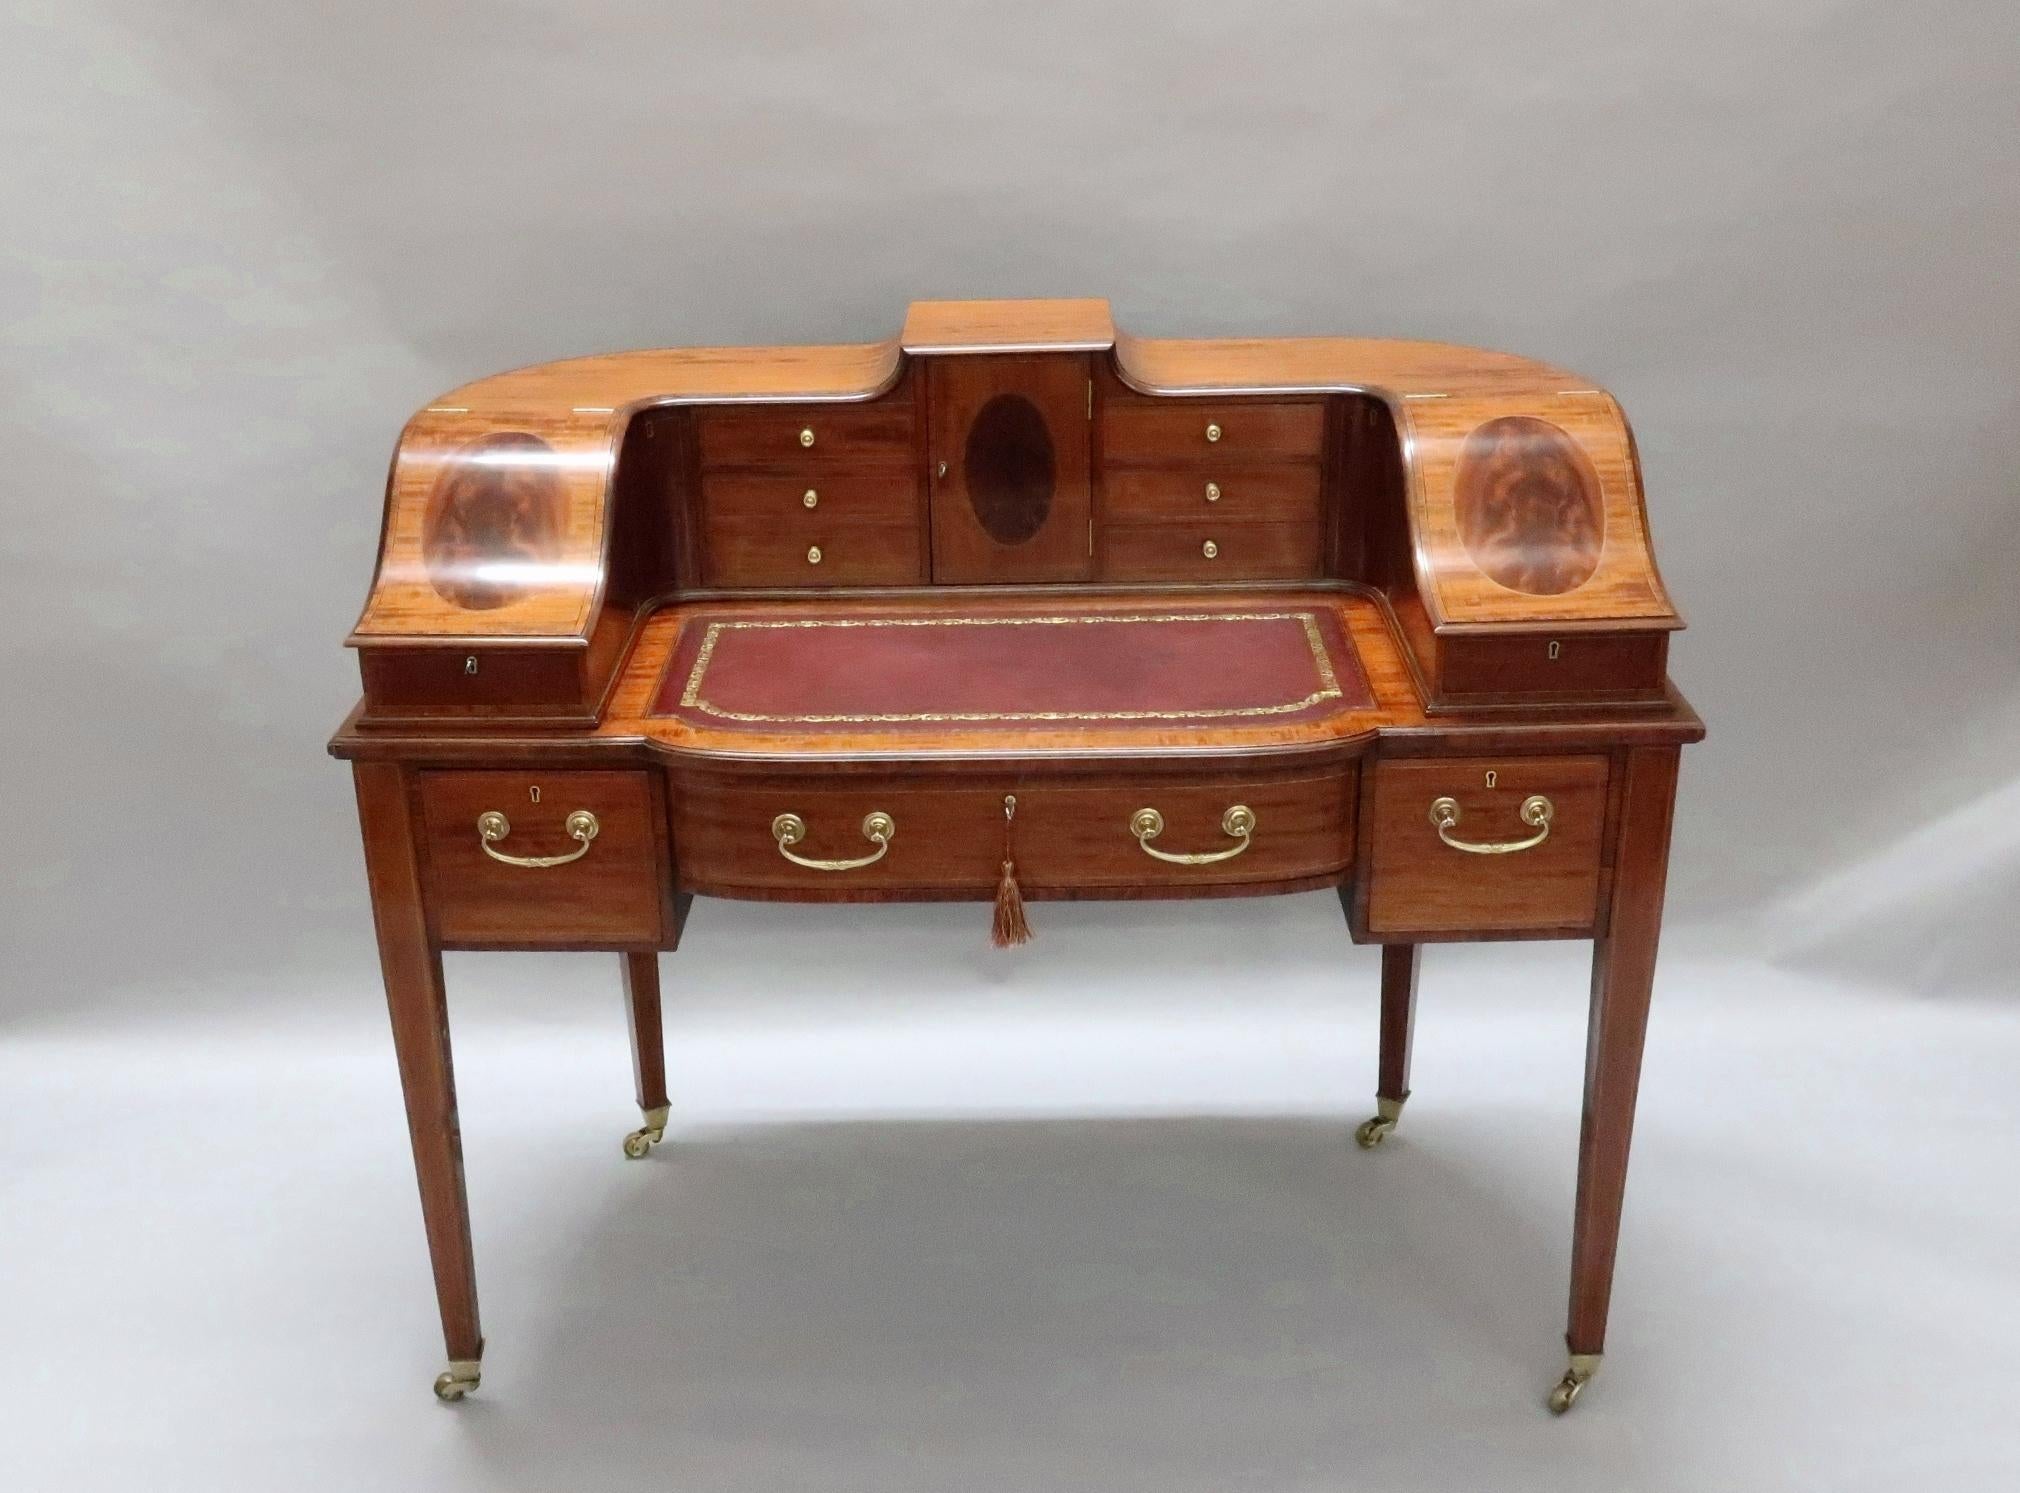 A superb quality Edwardian mahogany and kingwood crossbanded sweeping superstructure Carlton house desk with figured oval panels edged with ebony and boxwood stringing. The desk has an extendable maroon leather writing surface with letter